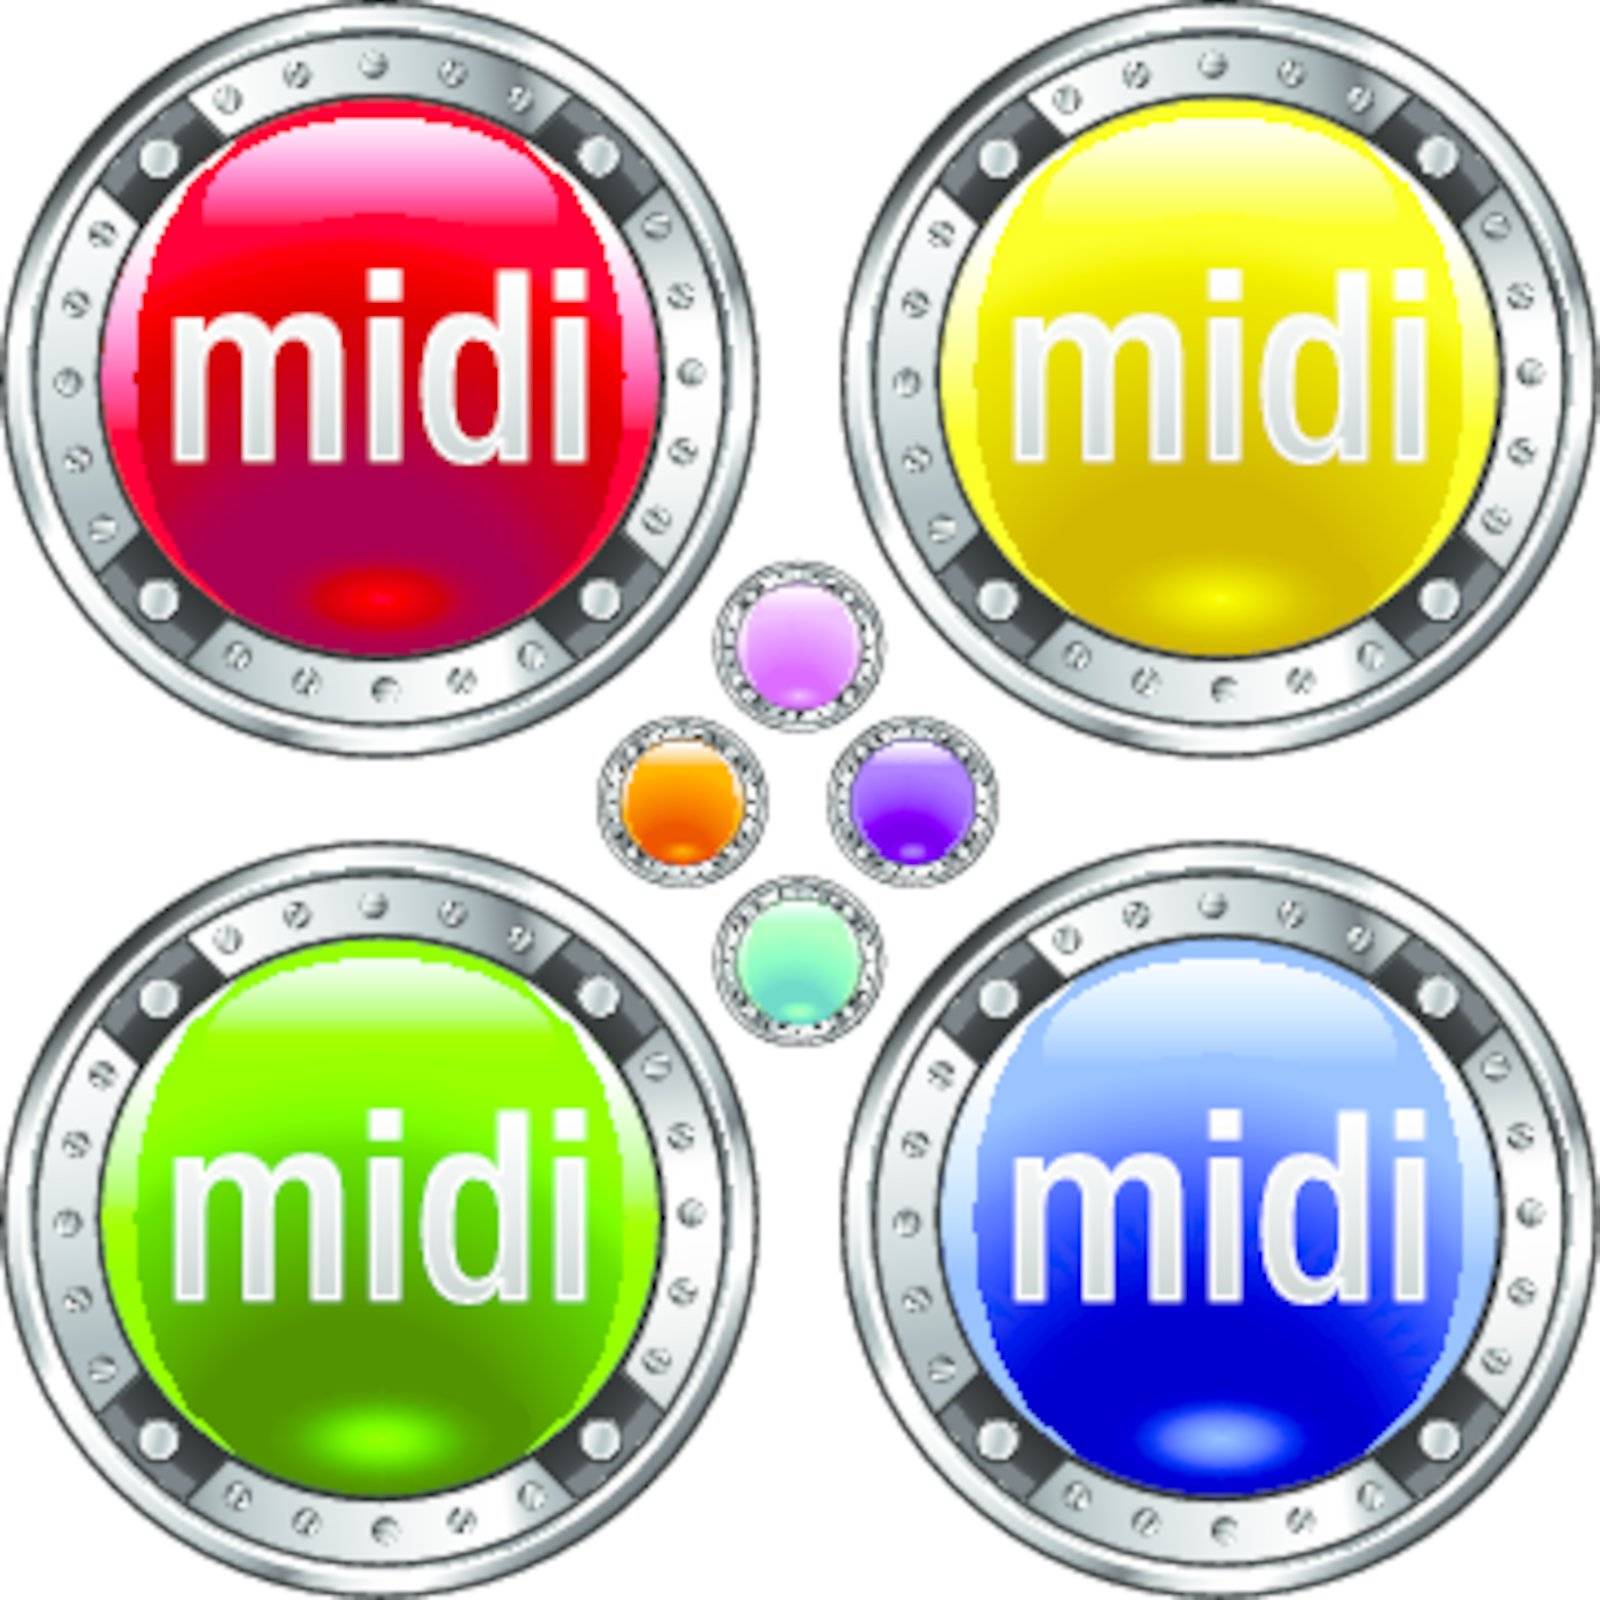 MIDI file extension icon on round colorful vector buttons suitable for use on websites, in print materials or in advertisements. Set includes red, yellow, green, and blue versions.